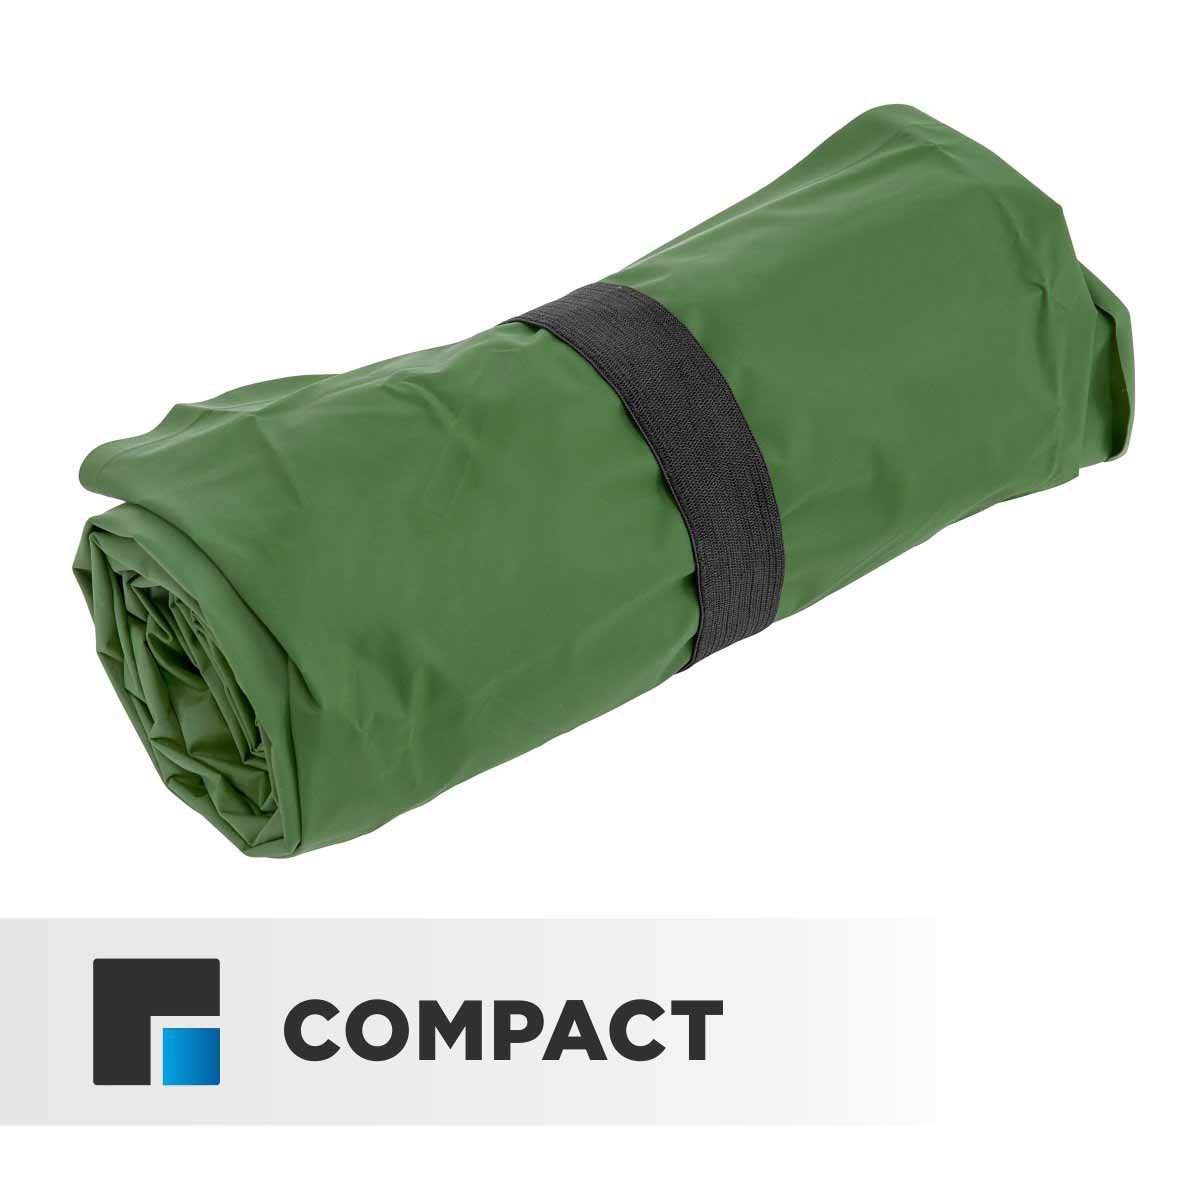 2-inch Waterproof Camping Self Inflating Sleeping Pad is easy to roll up and compact